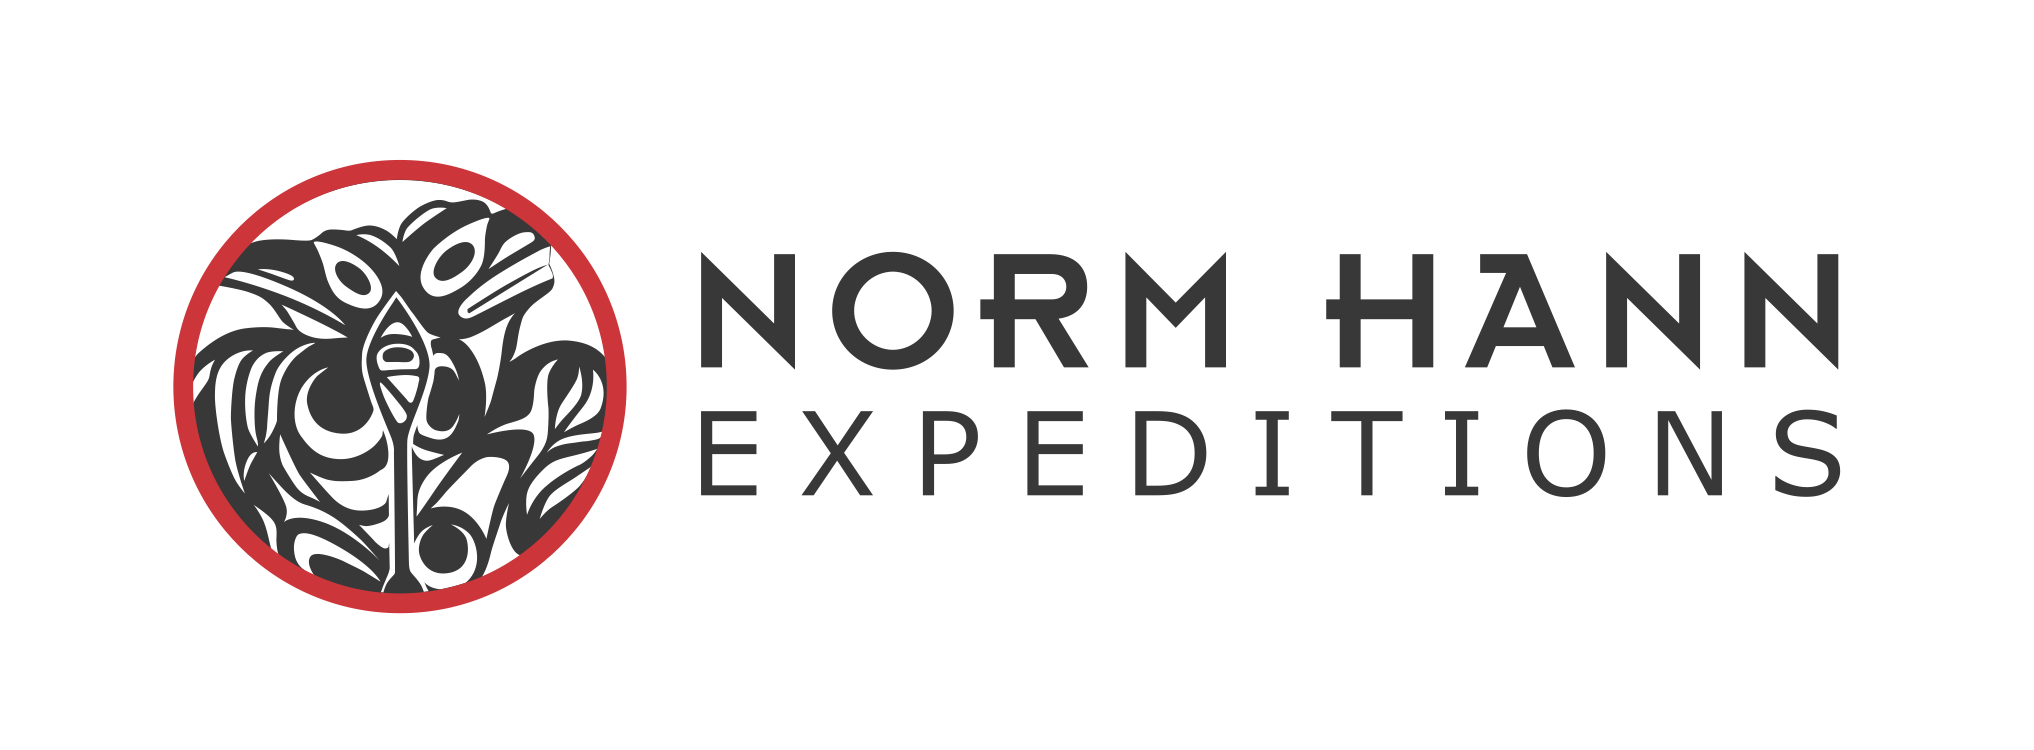 Norm Hann Expeditions Logo